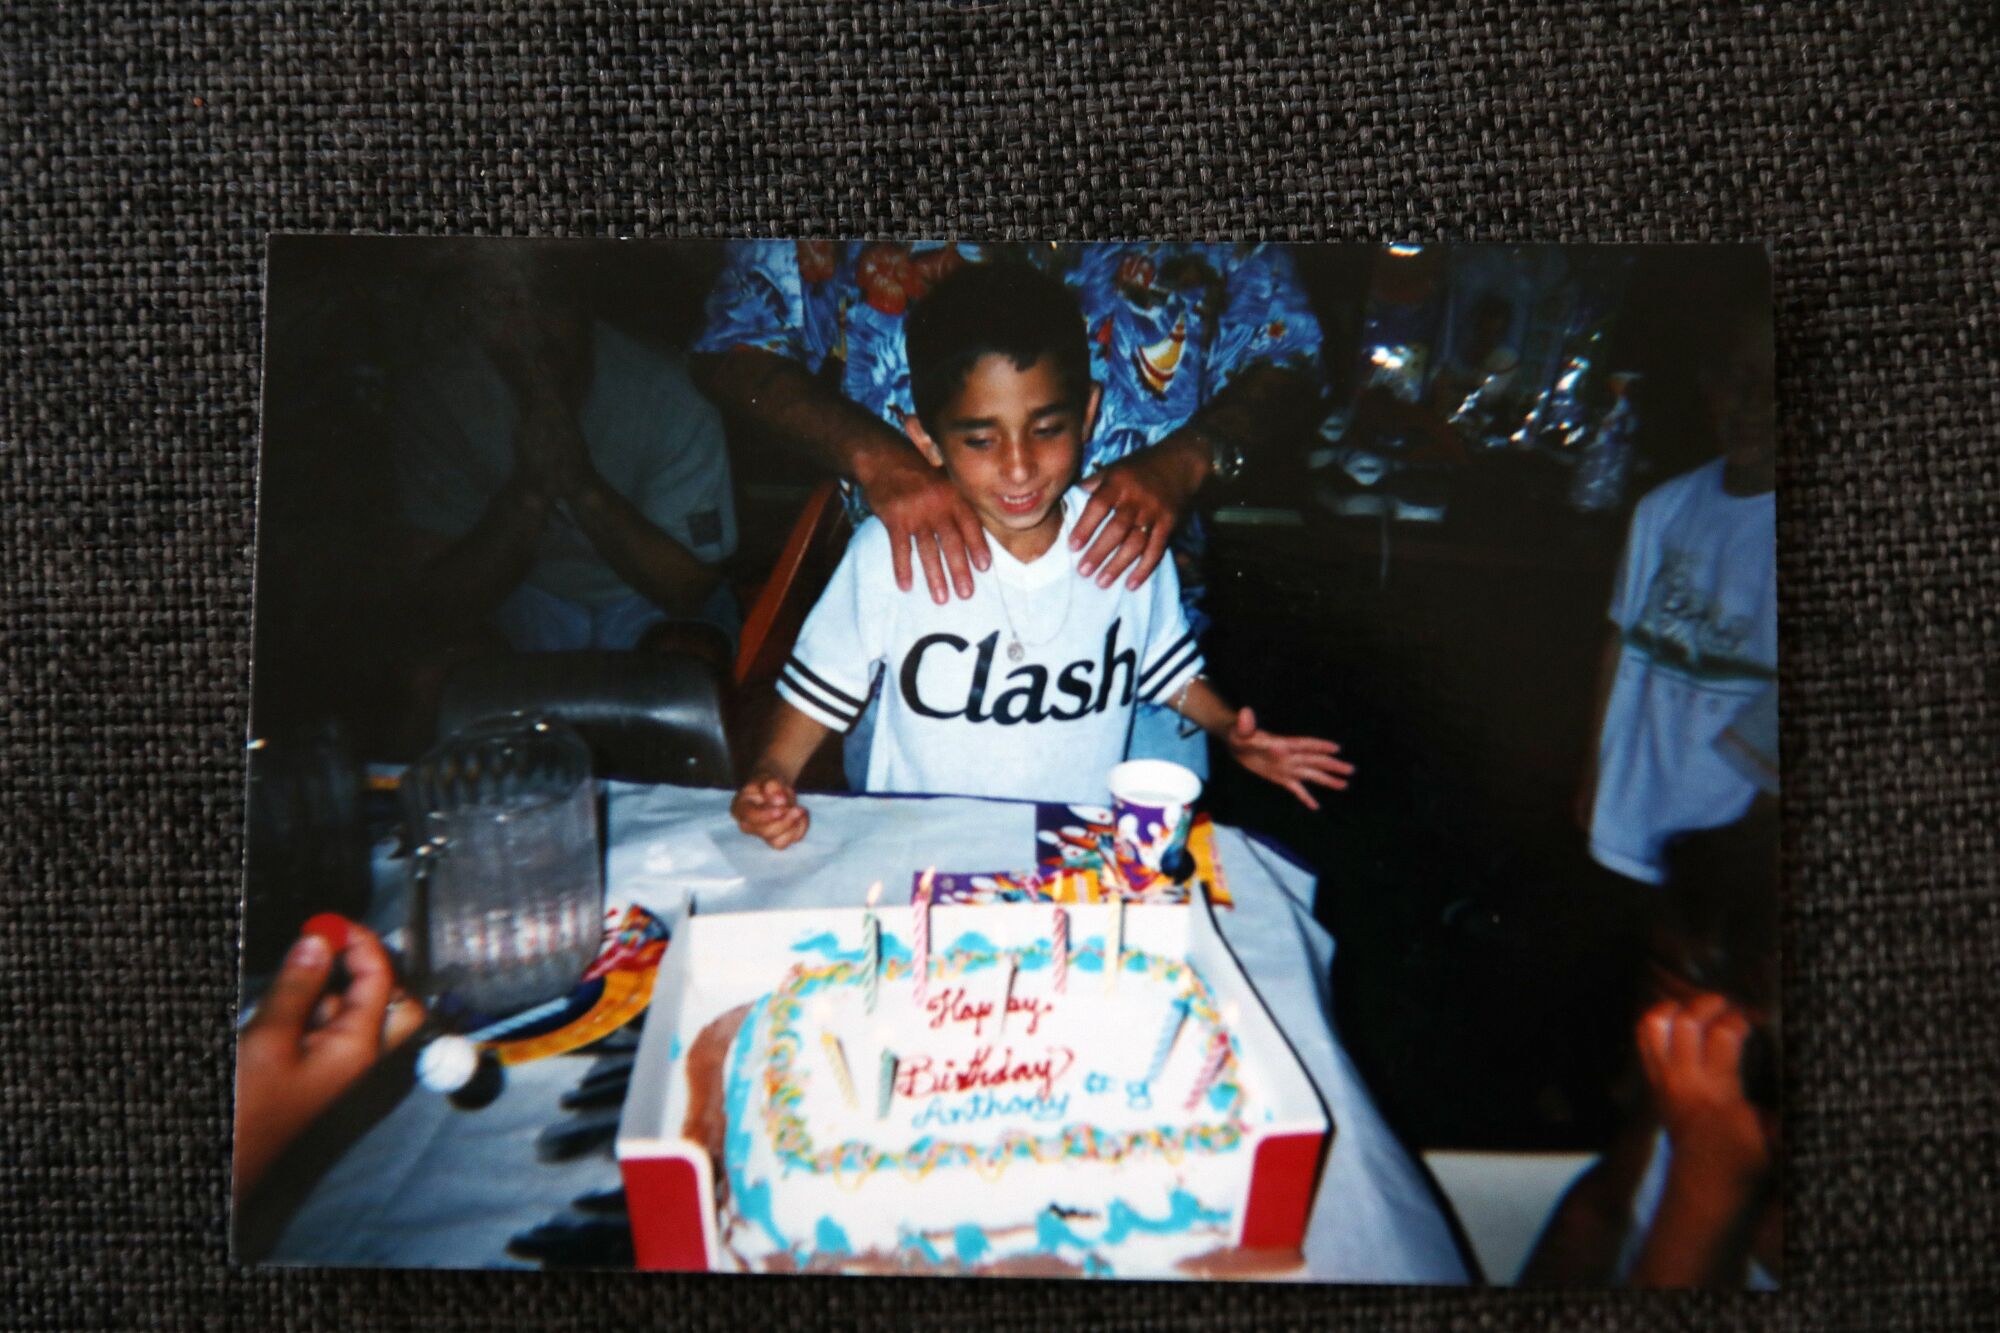 A boy in front of a birthday cake